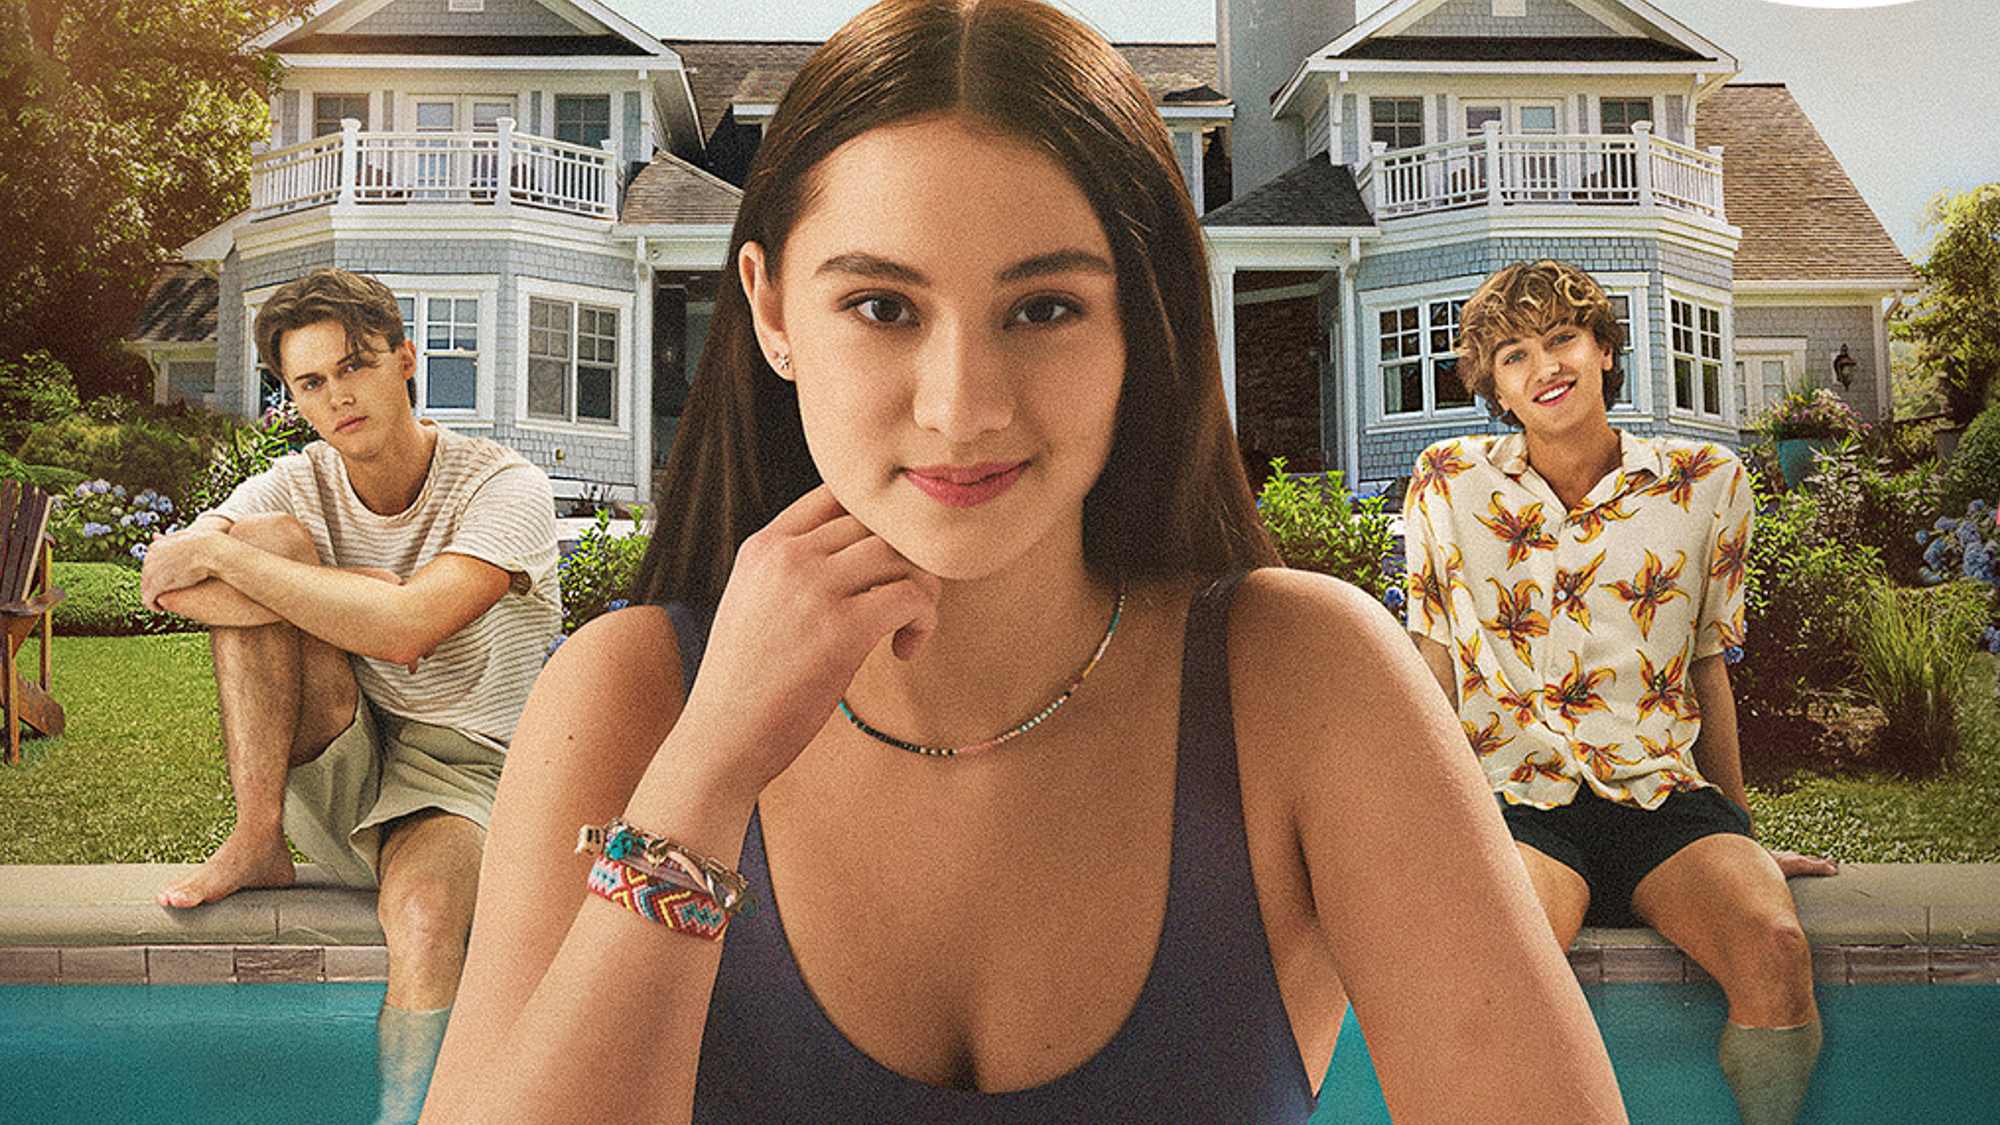 The Summer I Turned Pretty Season 3: What We Know So Far